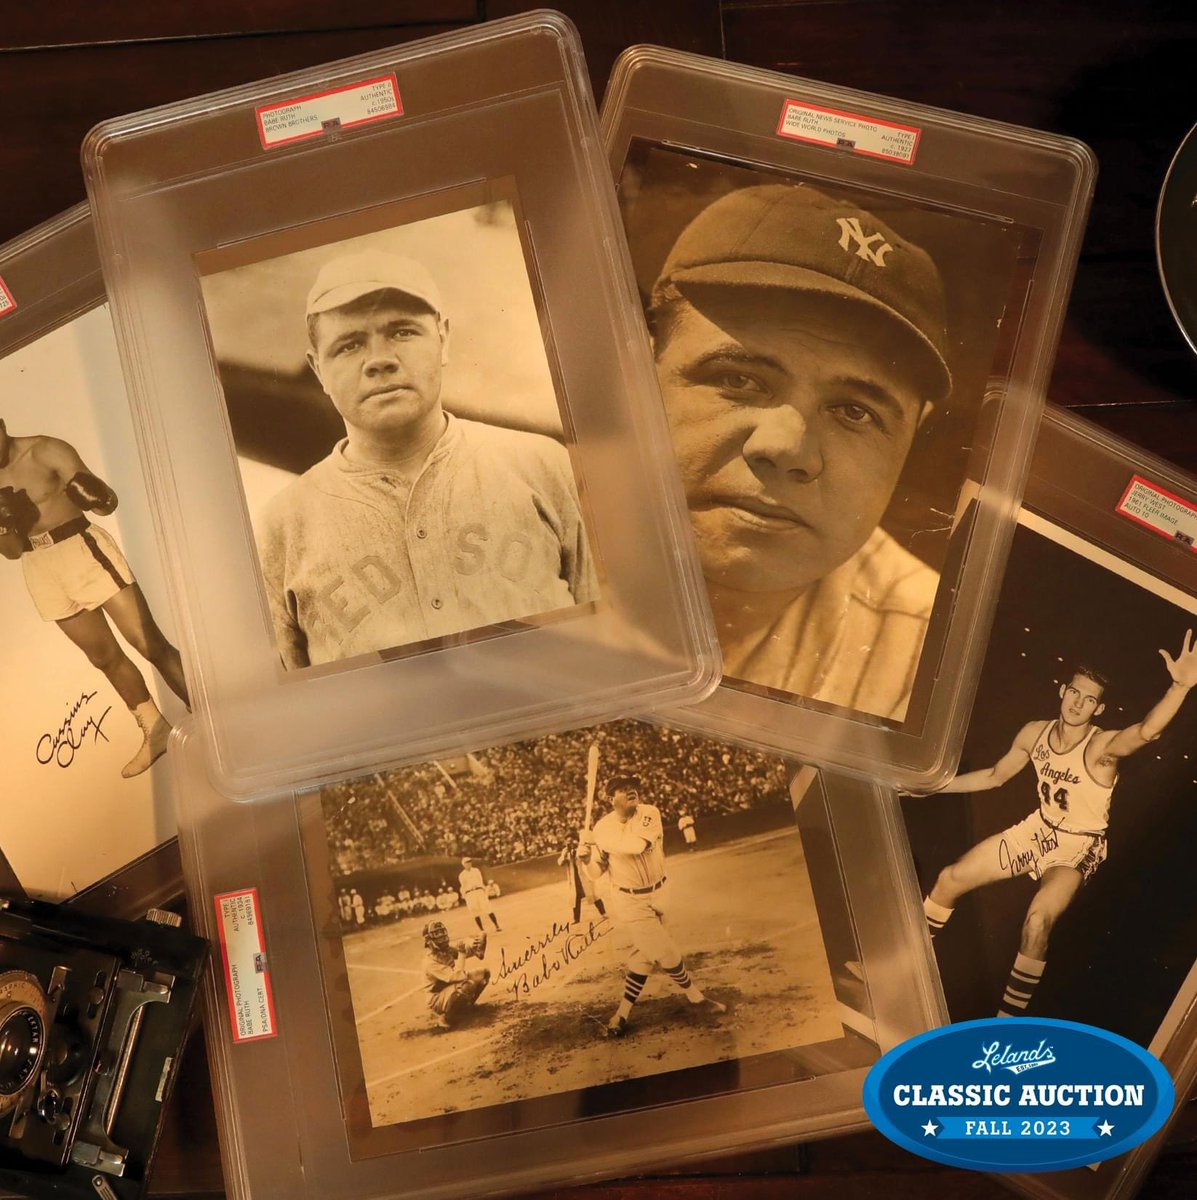 Must-See Photography! Explore historic snapshots of Babe Ruth, Jerry West, Cassius Clay, and more up for grabs in the Lelands Fall Classic auction! Bid now and one of these important photos could be yours! lelands.com The Fall Classic Ends Nov 18 at 10 PM ET